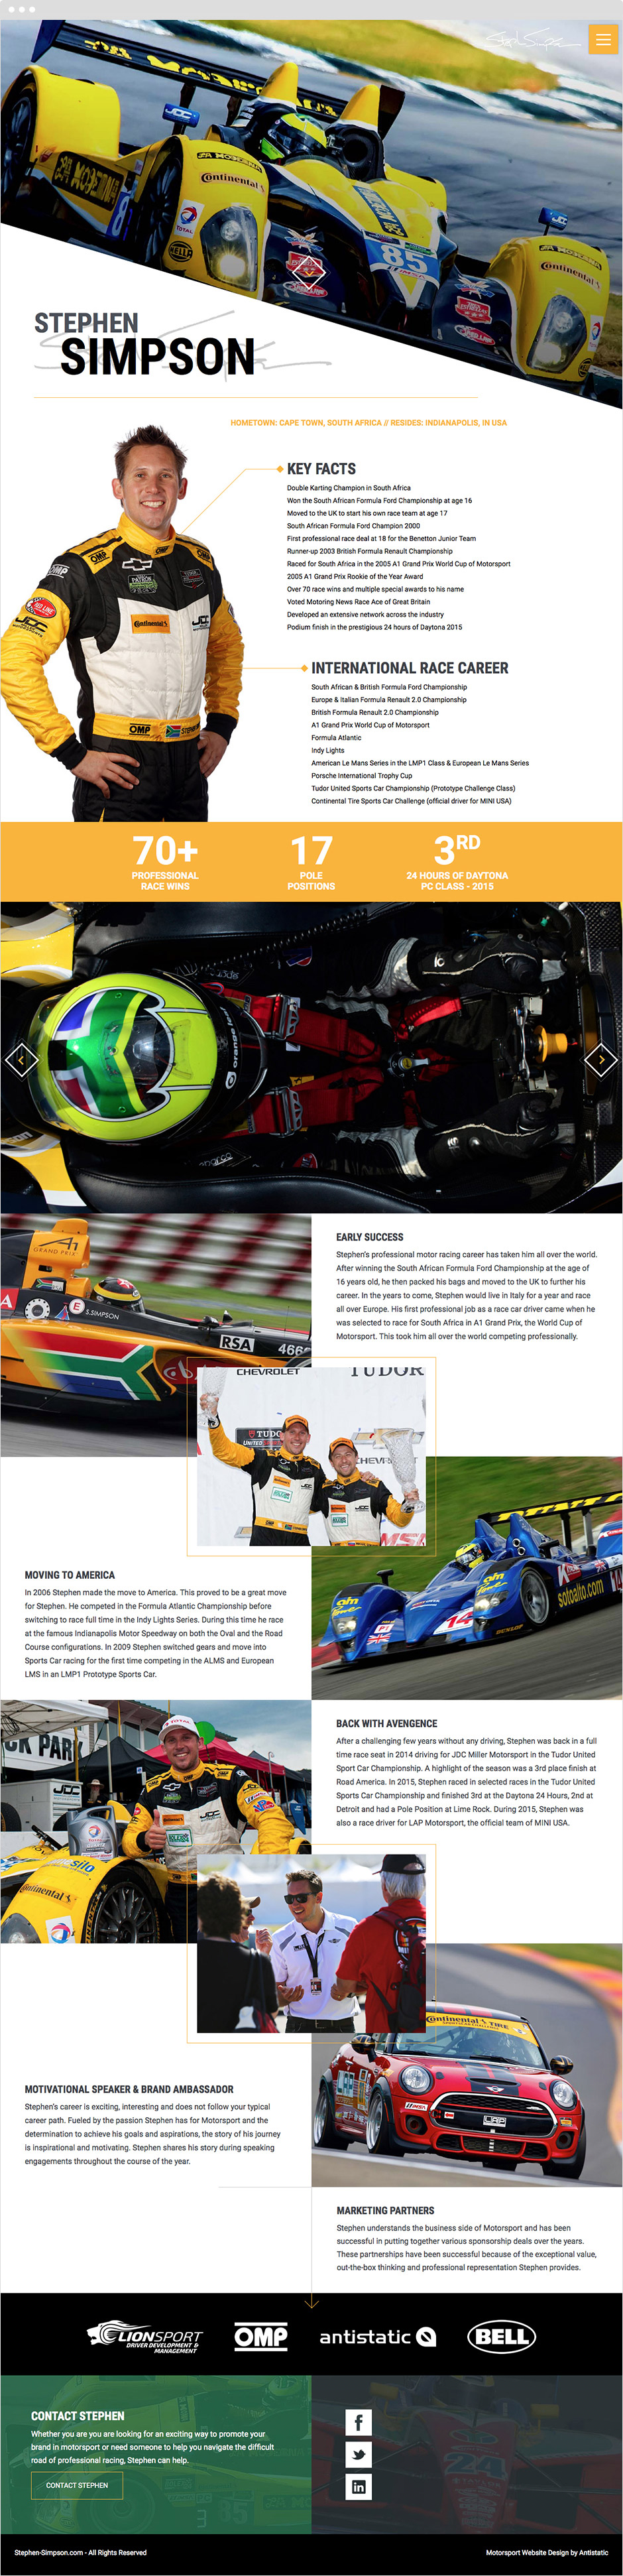 Responsive ExpressionEngine Web Design for Racing Driver Stephen Simpson